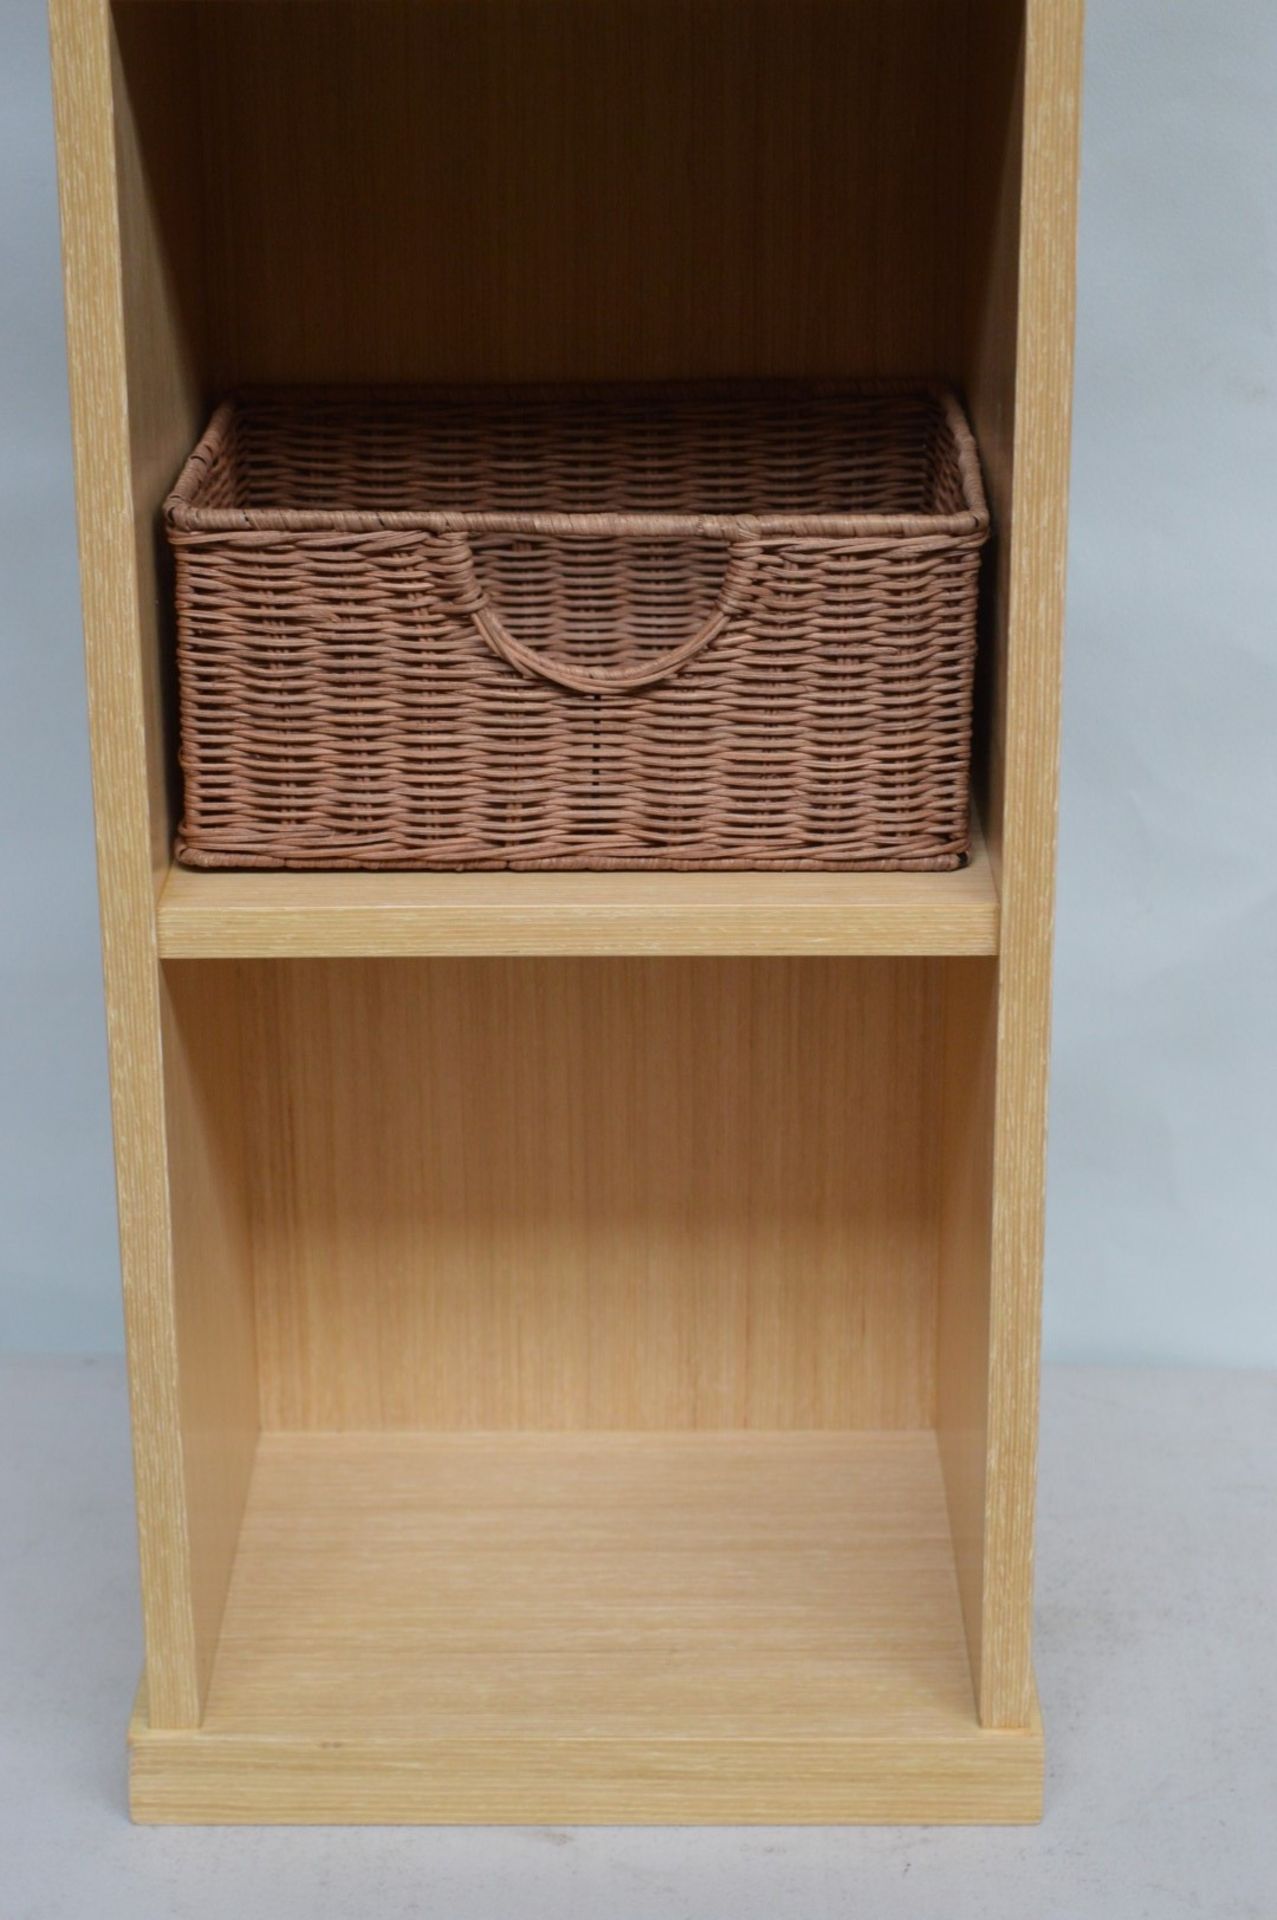 1 x Vogue ARC Series 2 Bathroom Storage Shelving Unit - Wall Mounted or Floor Standing - OAK - Image 5 of 8